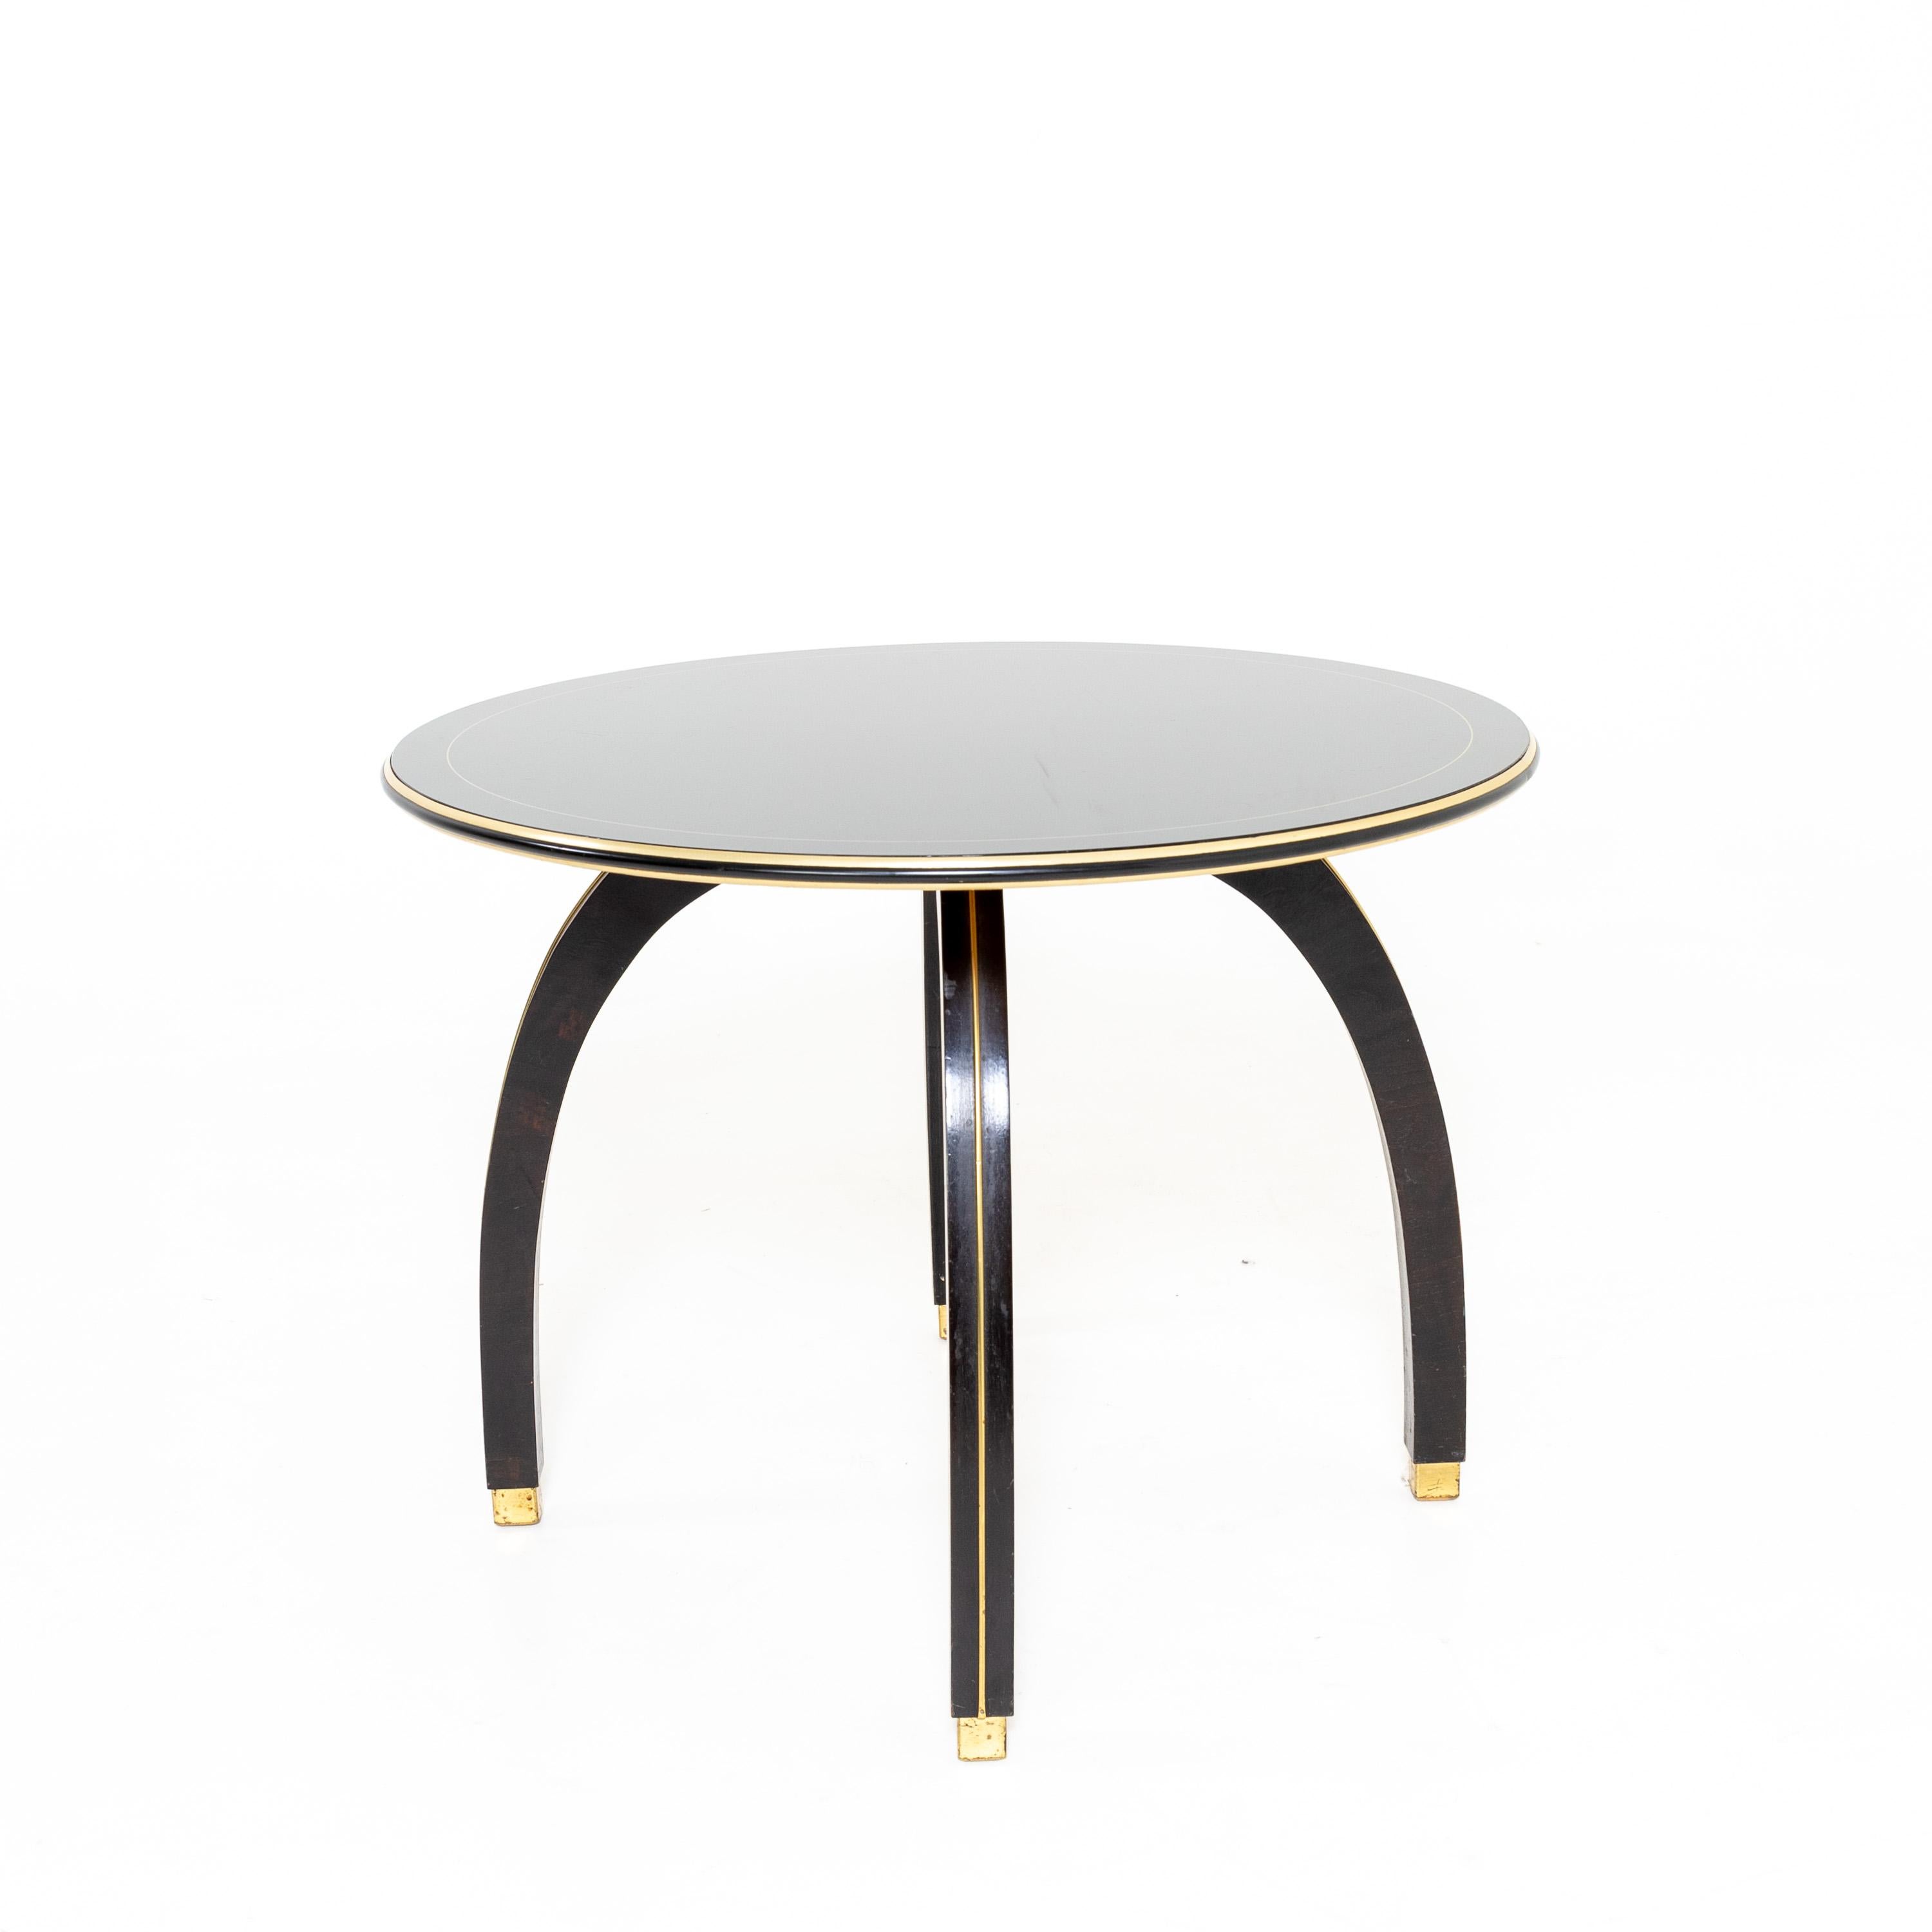 Side table on four curved legs with brass inlay and square brass bases. The round table top also has brass accents.